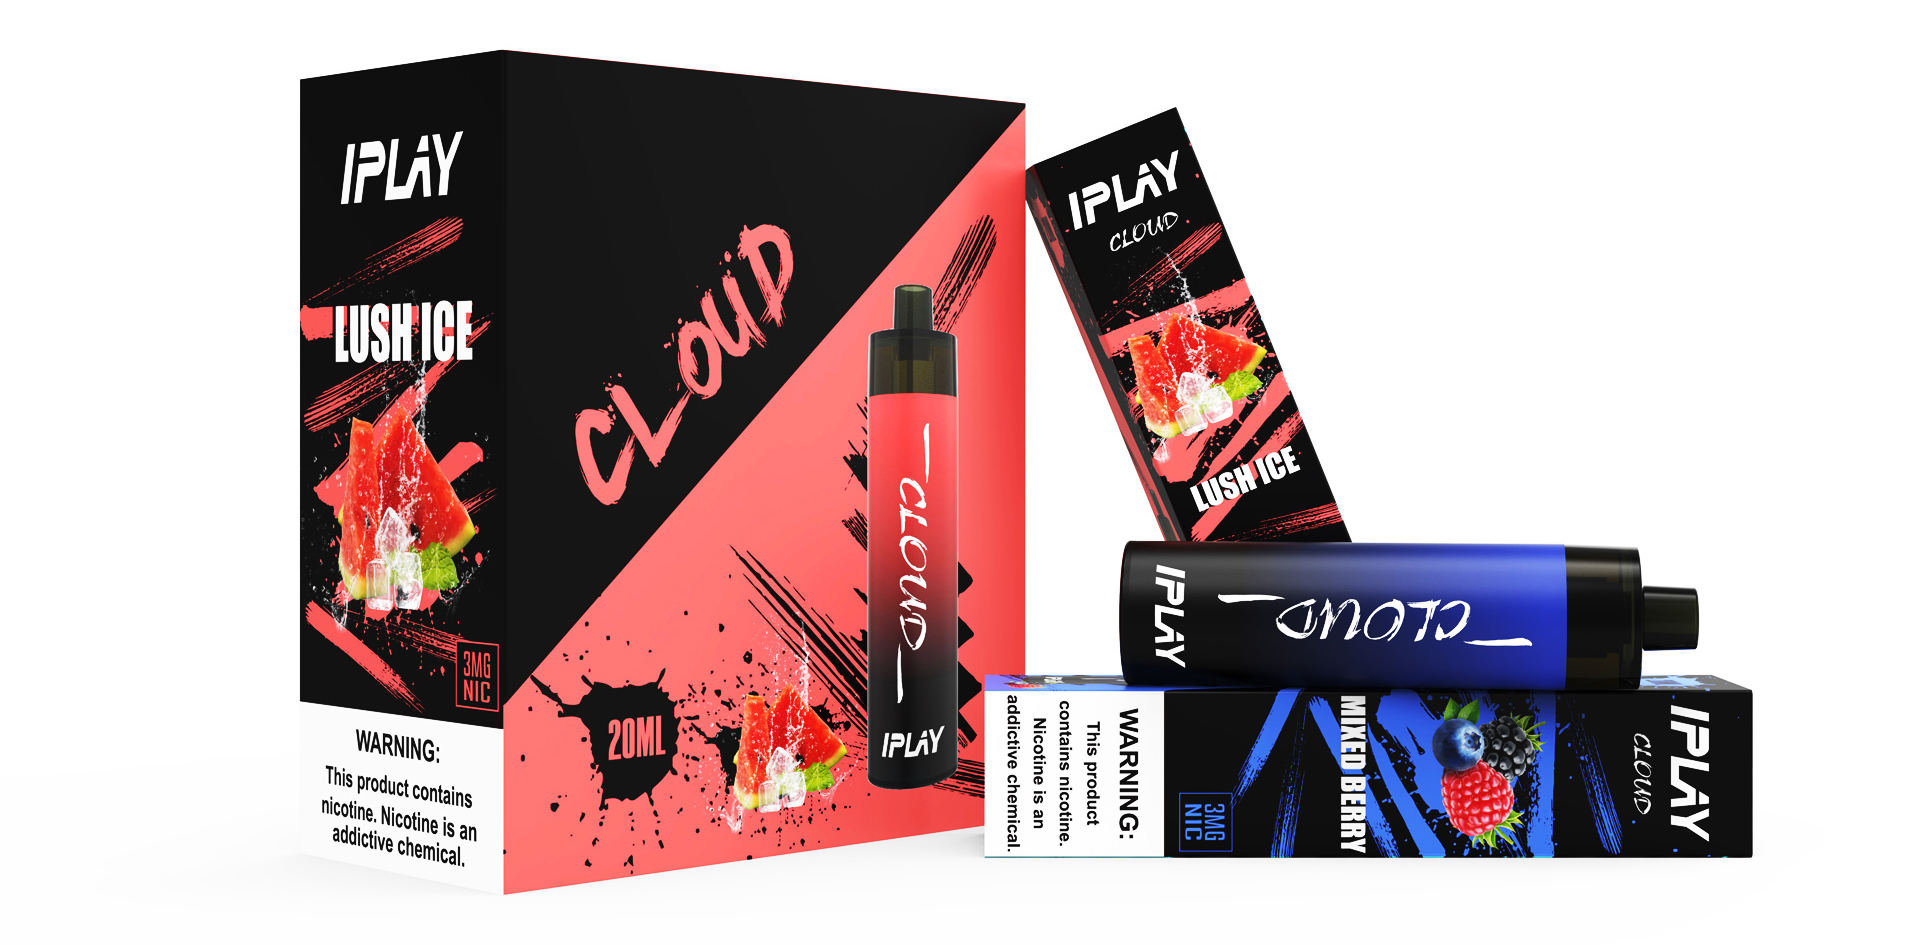 IPLAY-CLOUD-DISPOSABLE-PACKAGE INCLUDE